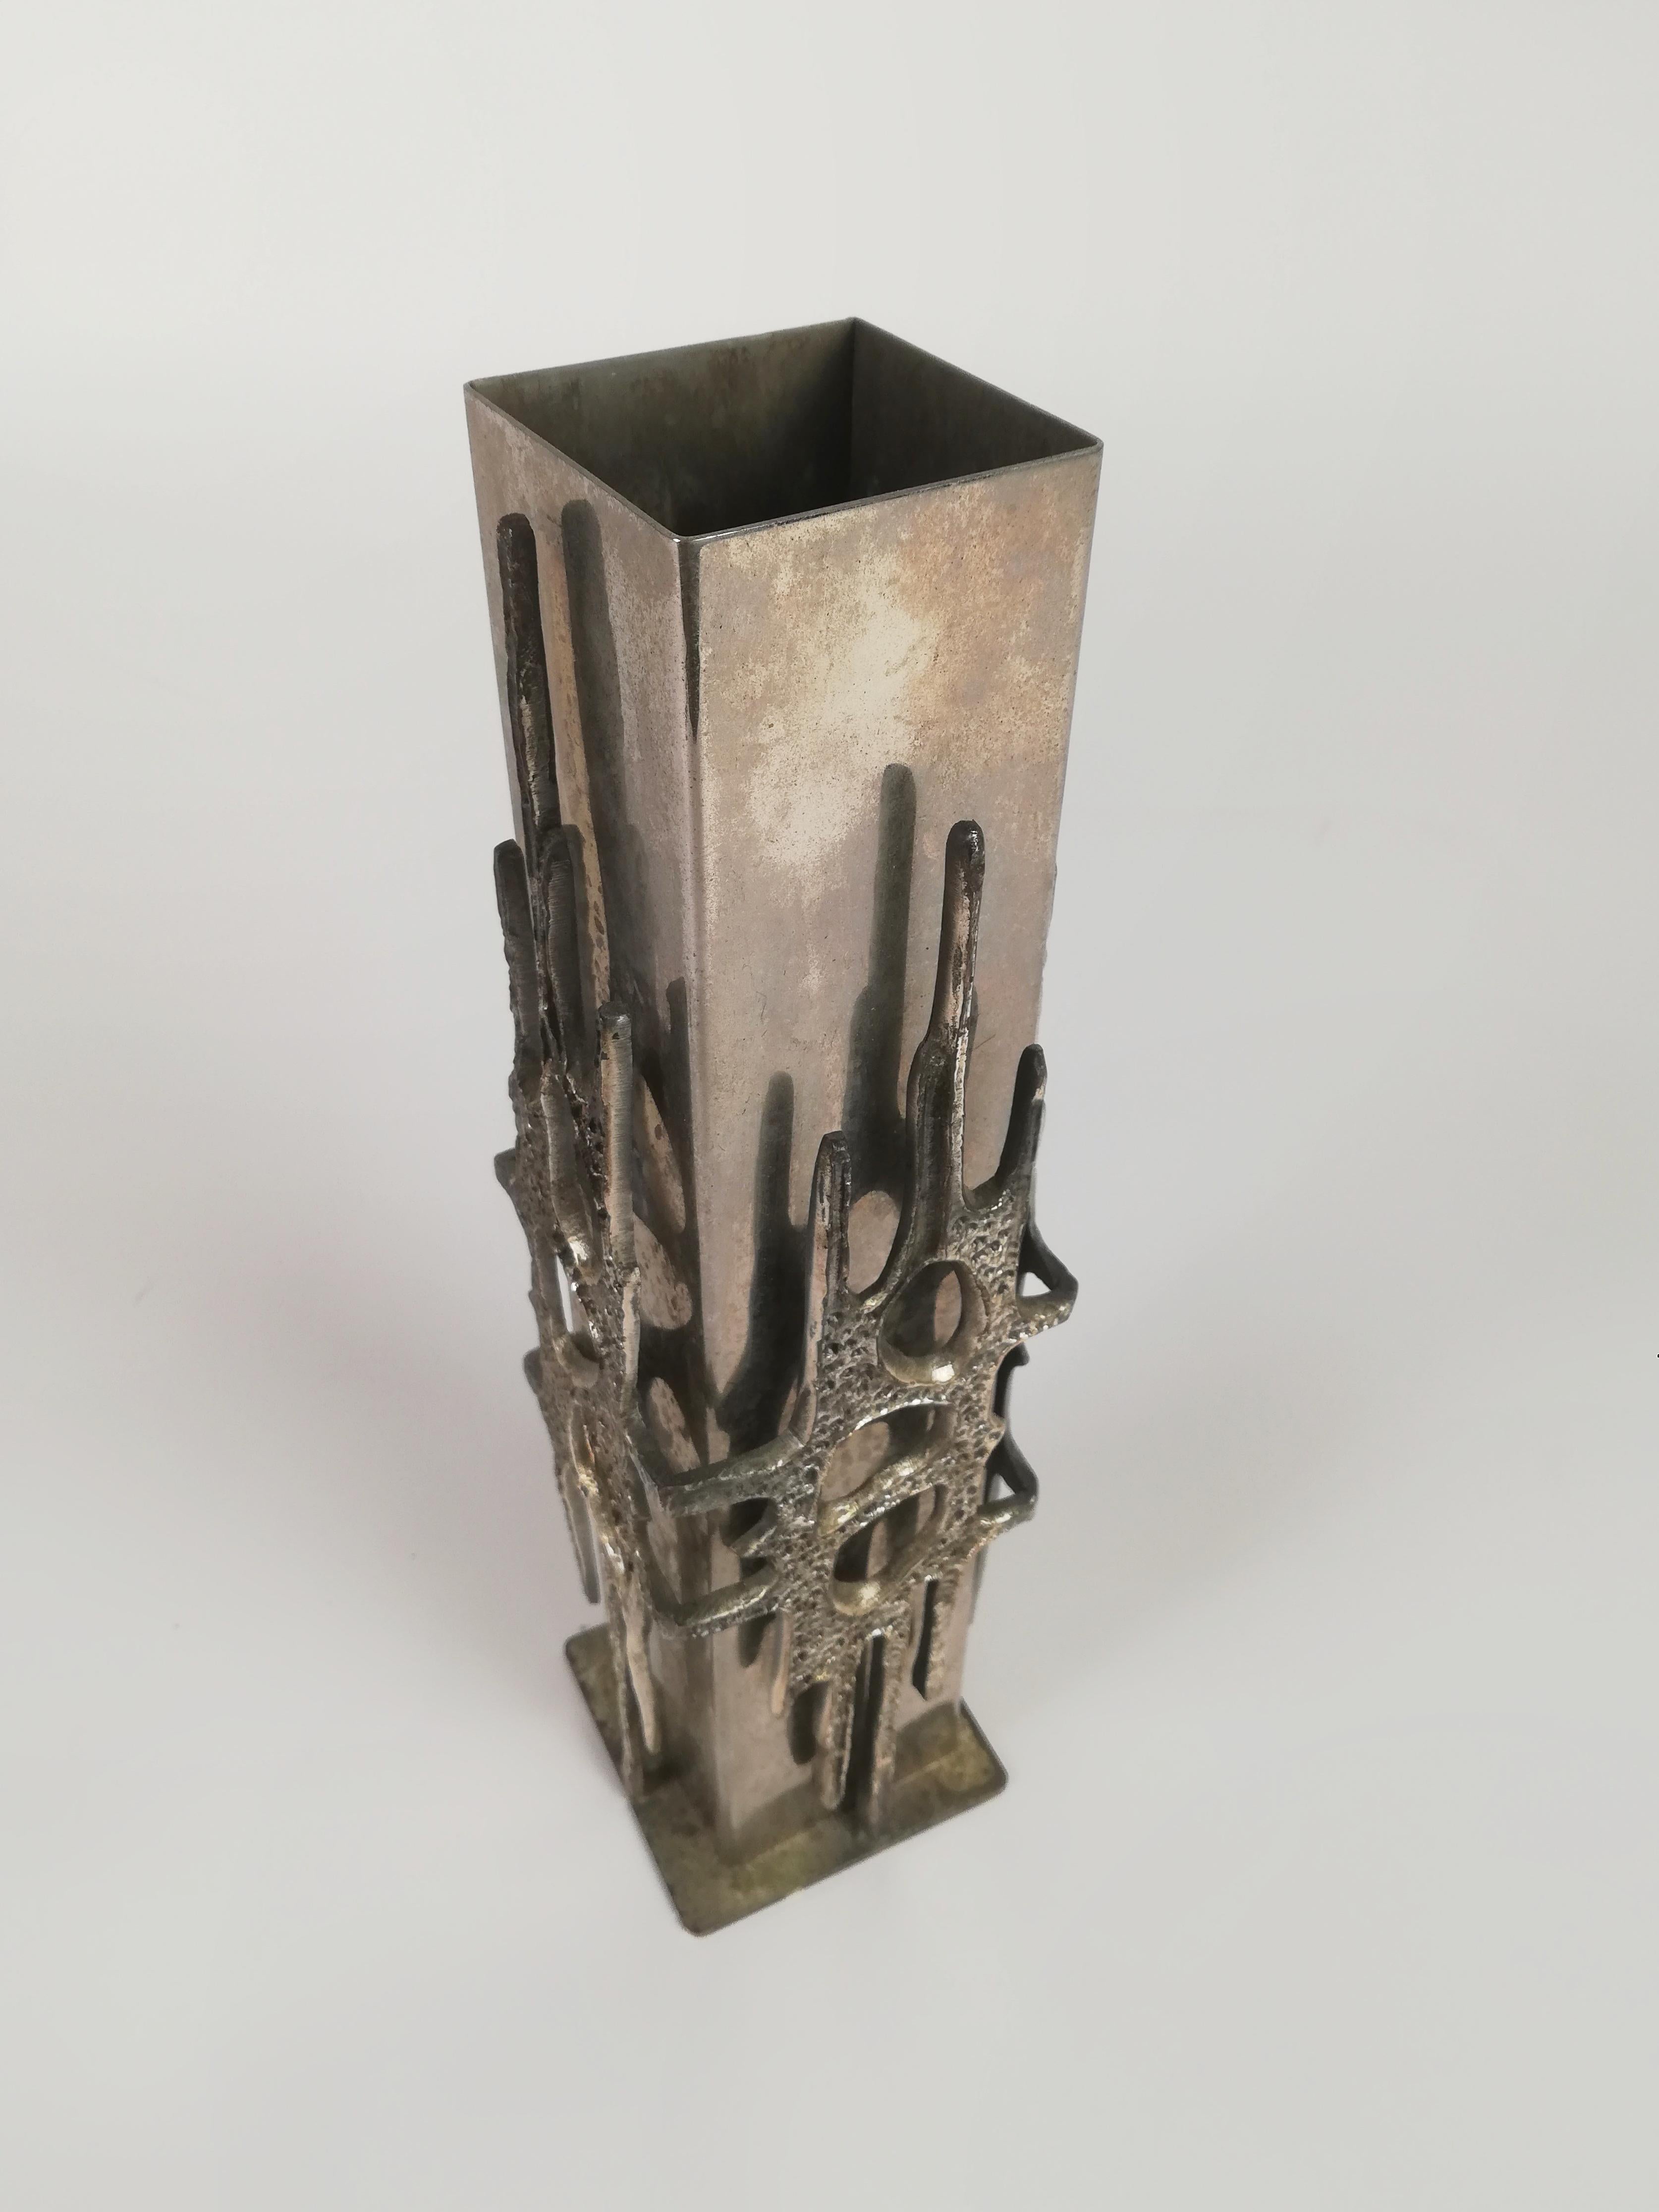 20th Century Brutalist Italian Steel Vase in the Style of Luciano Frigerio, Italy 1970s For Sale